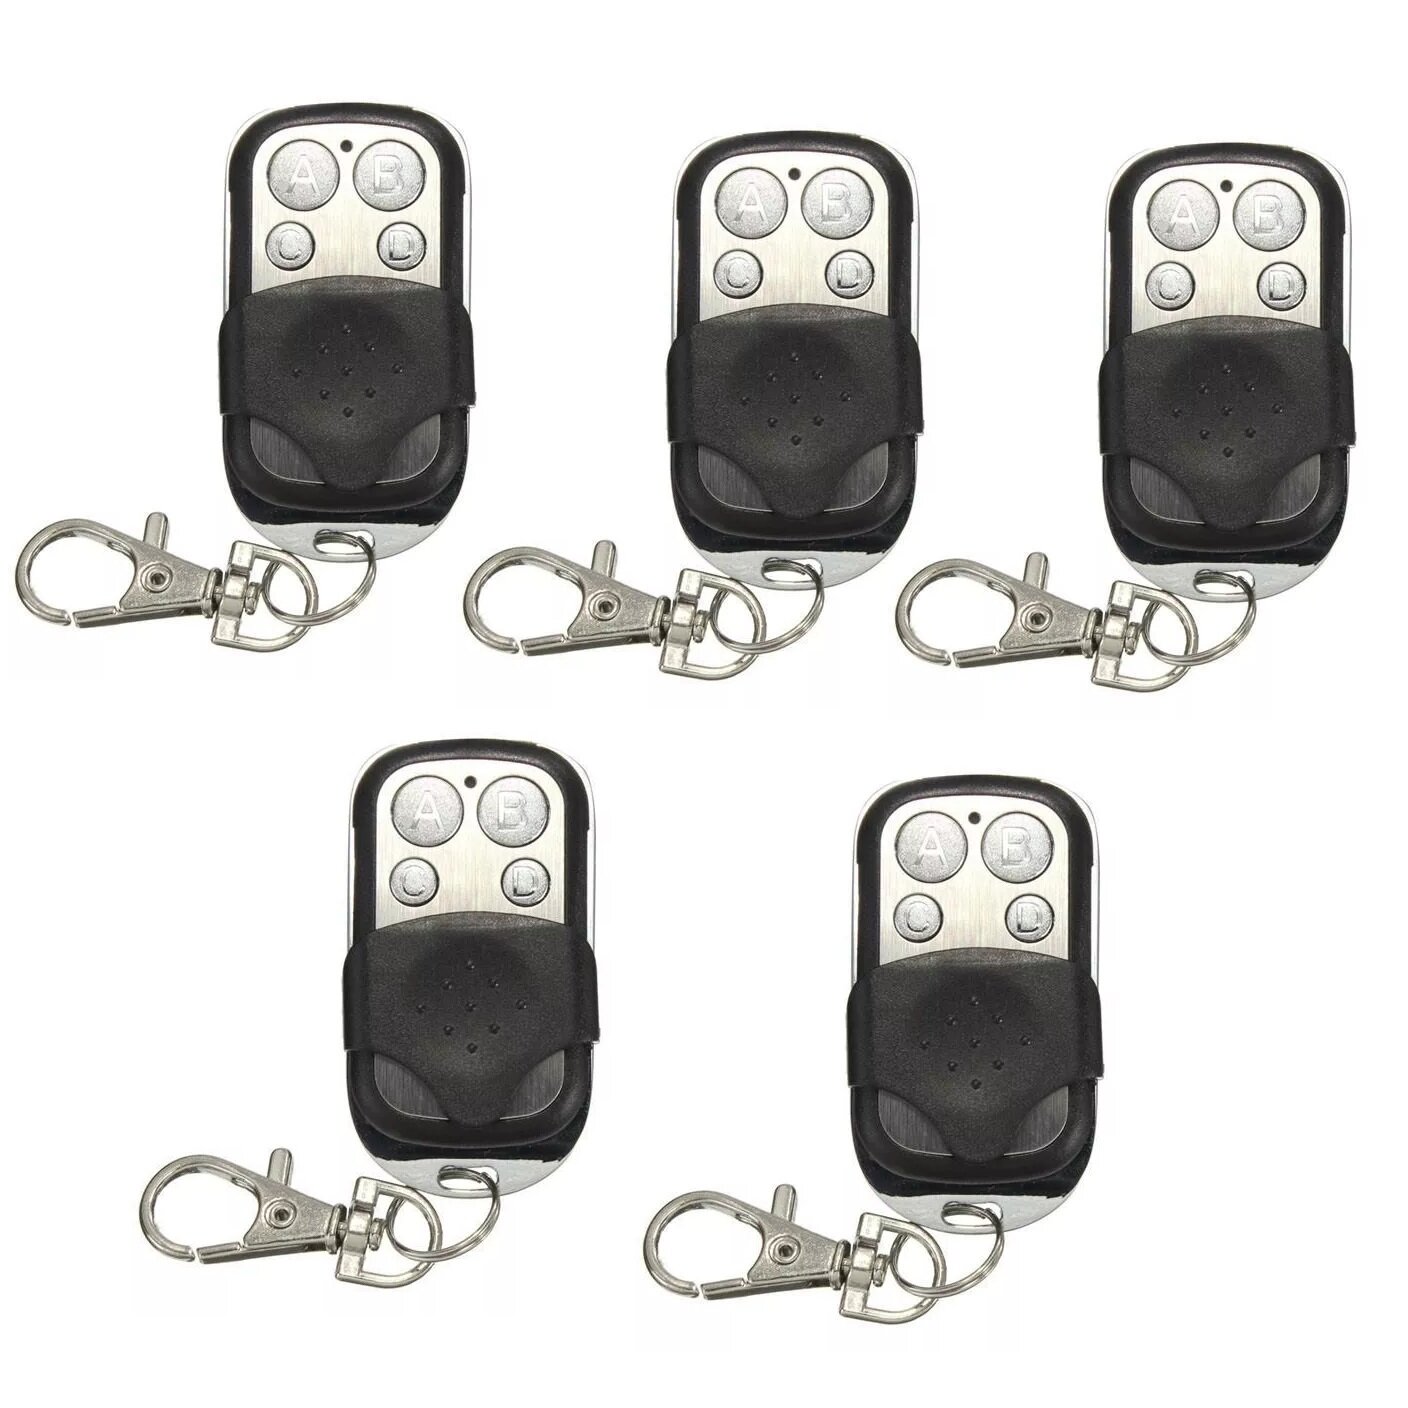 Universal Electric Cloning Remote Control Key Fob Gate Garage Door Open 433mhz